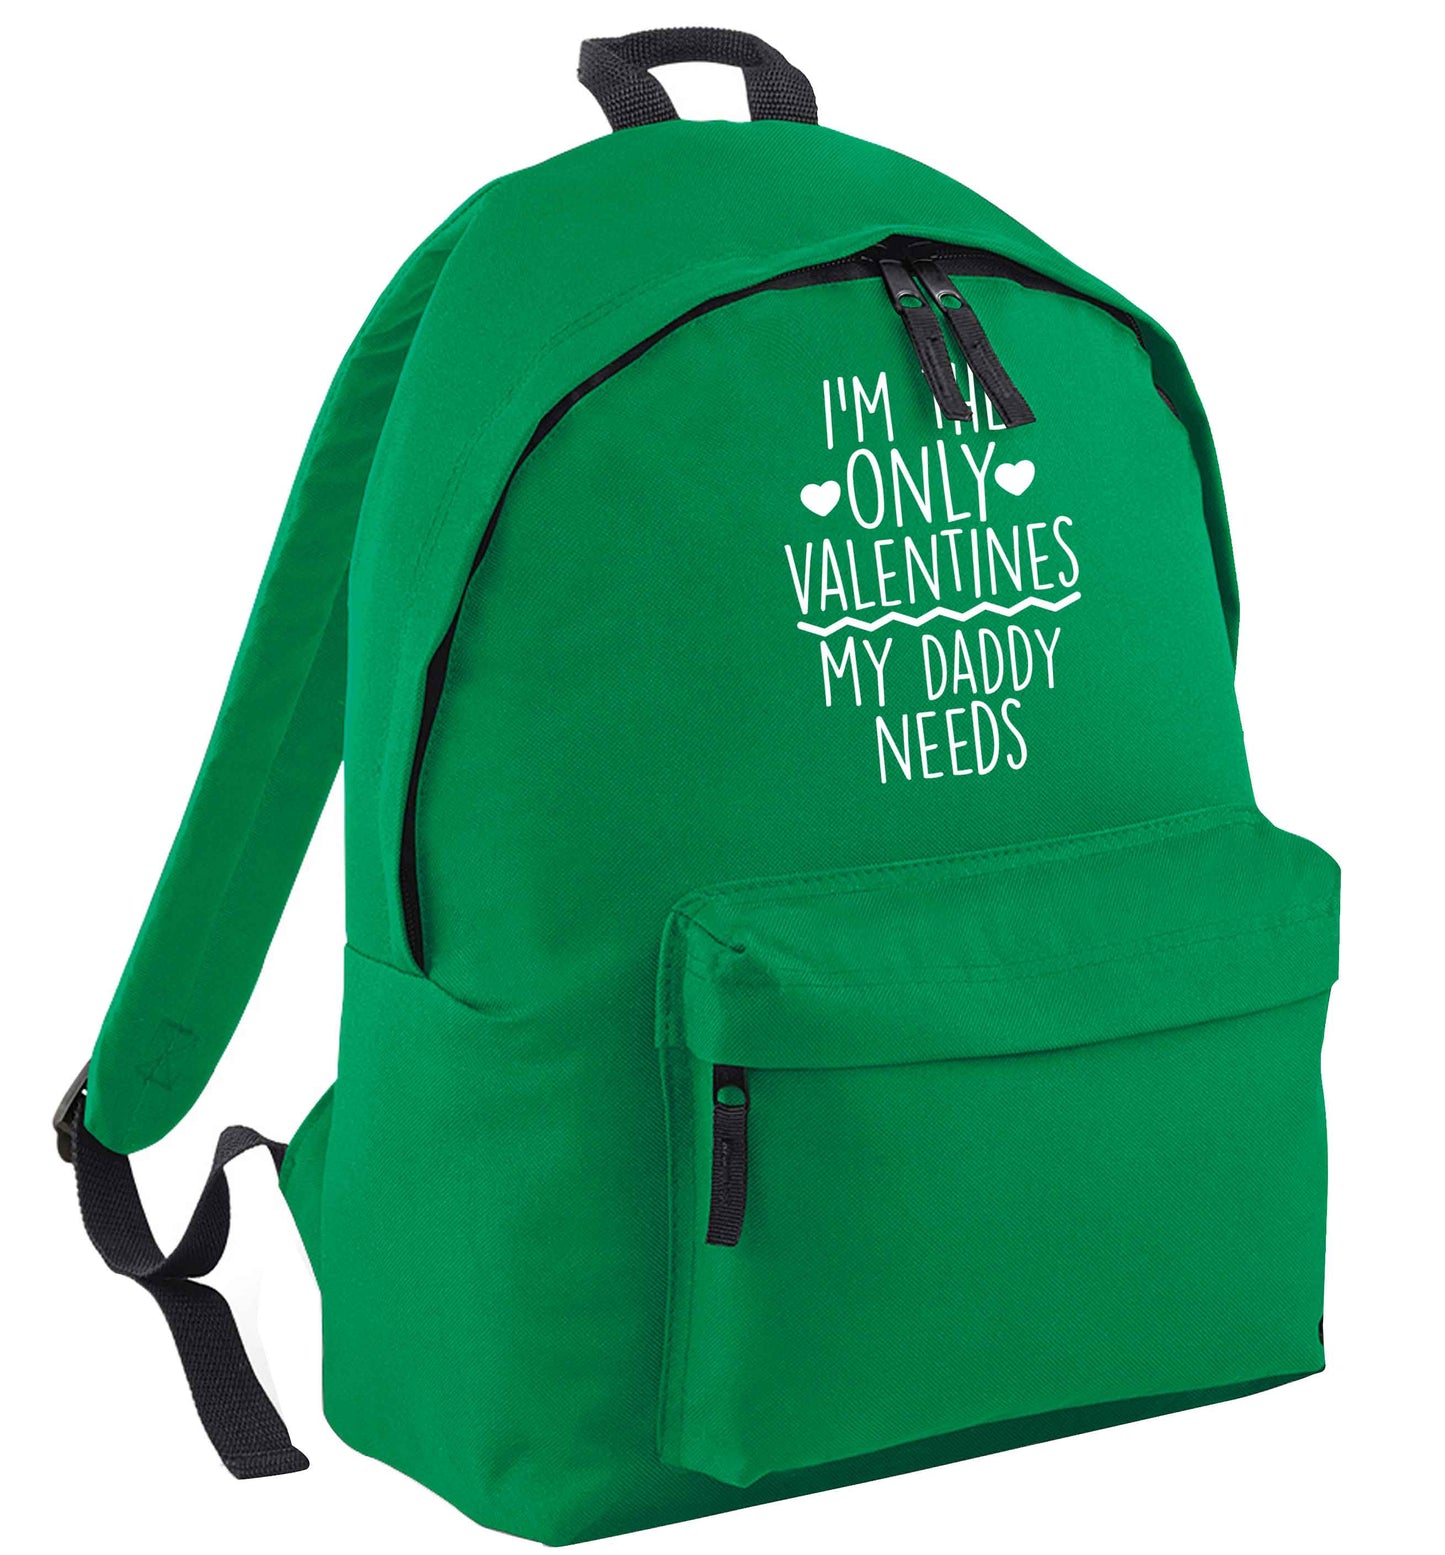 I'm the only valentines my daddy needs green adults backpack